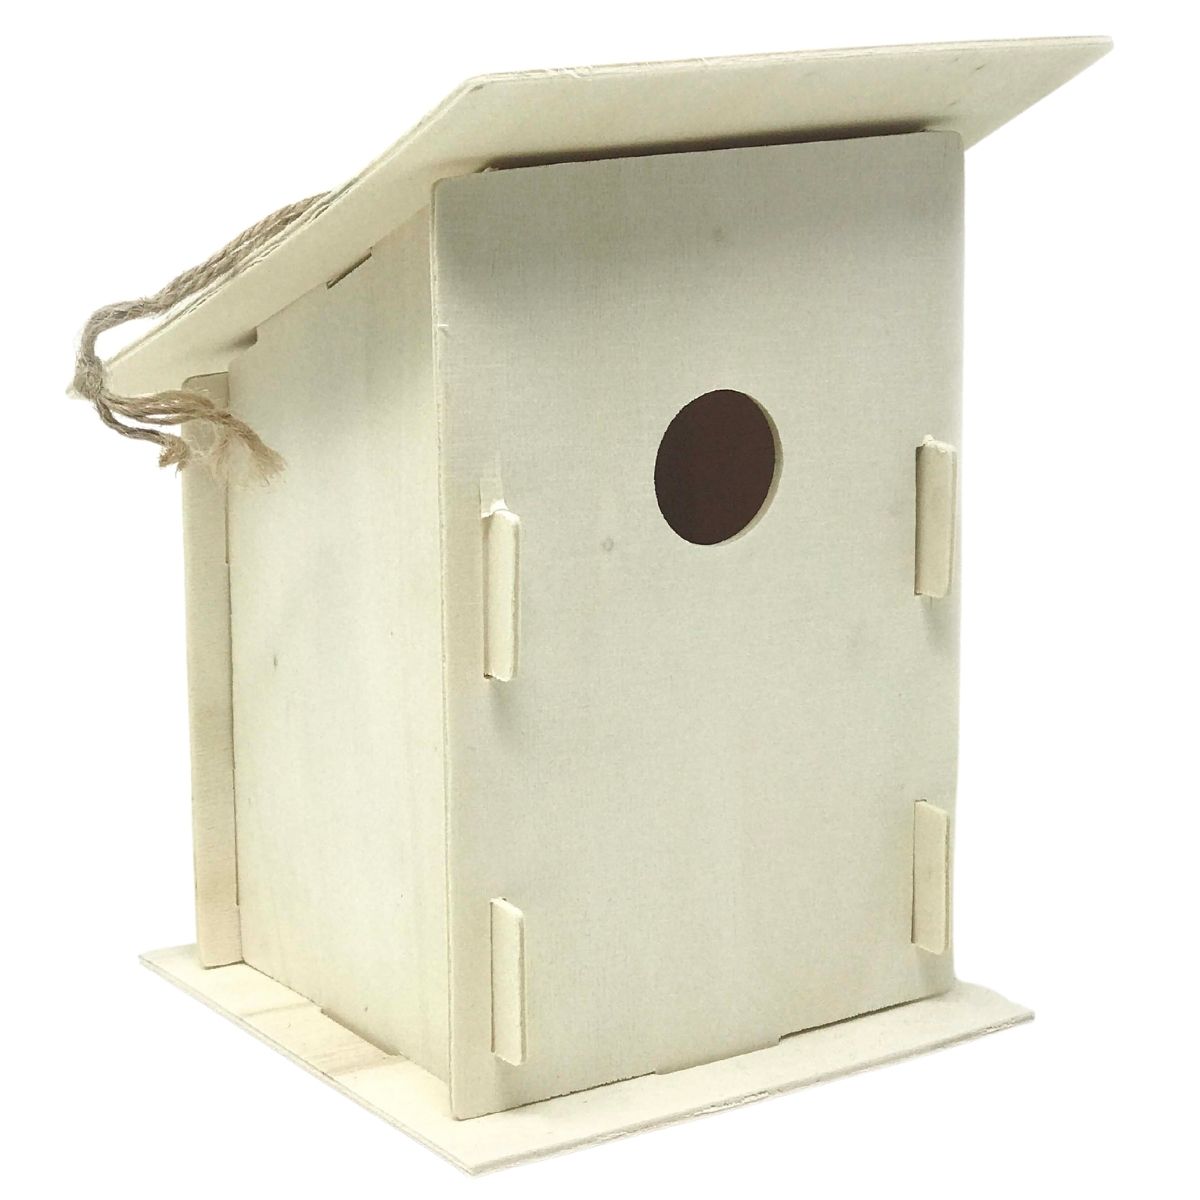 Wooden Build Your Own Birdhouse